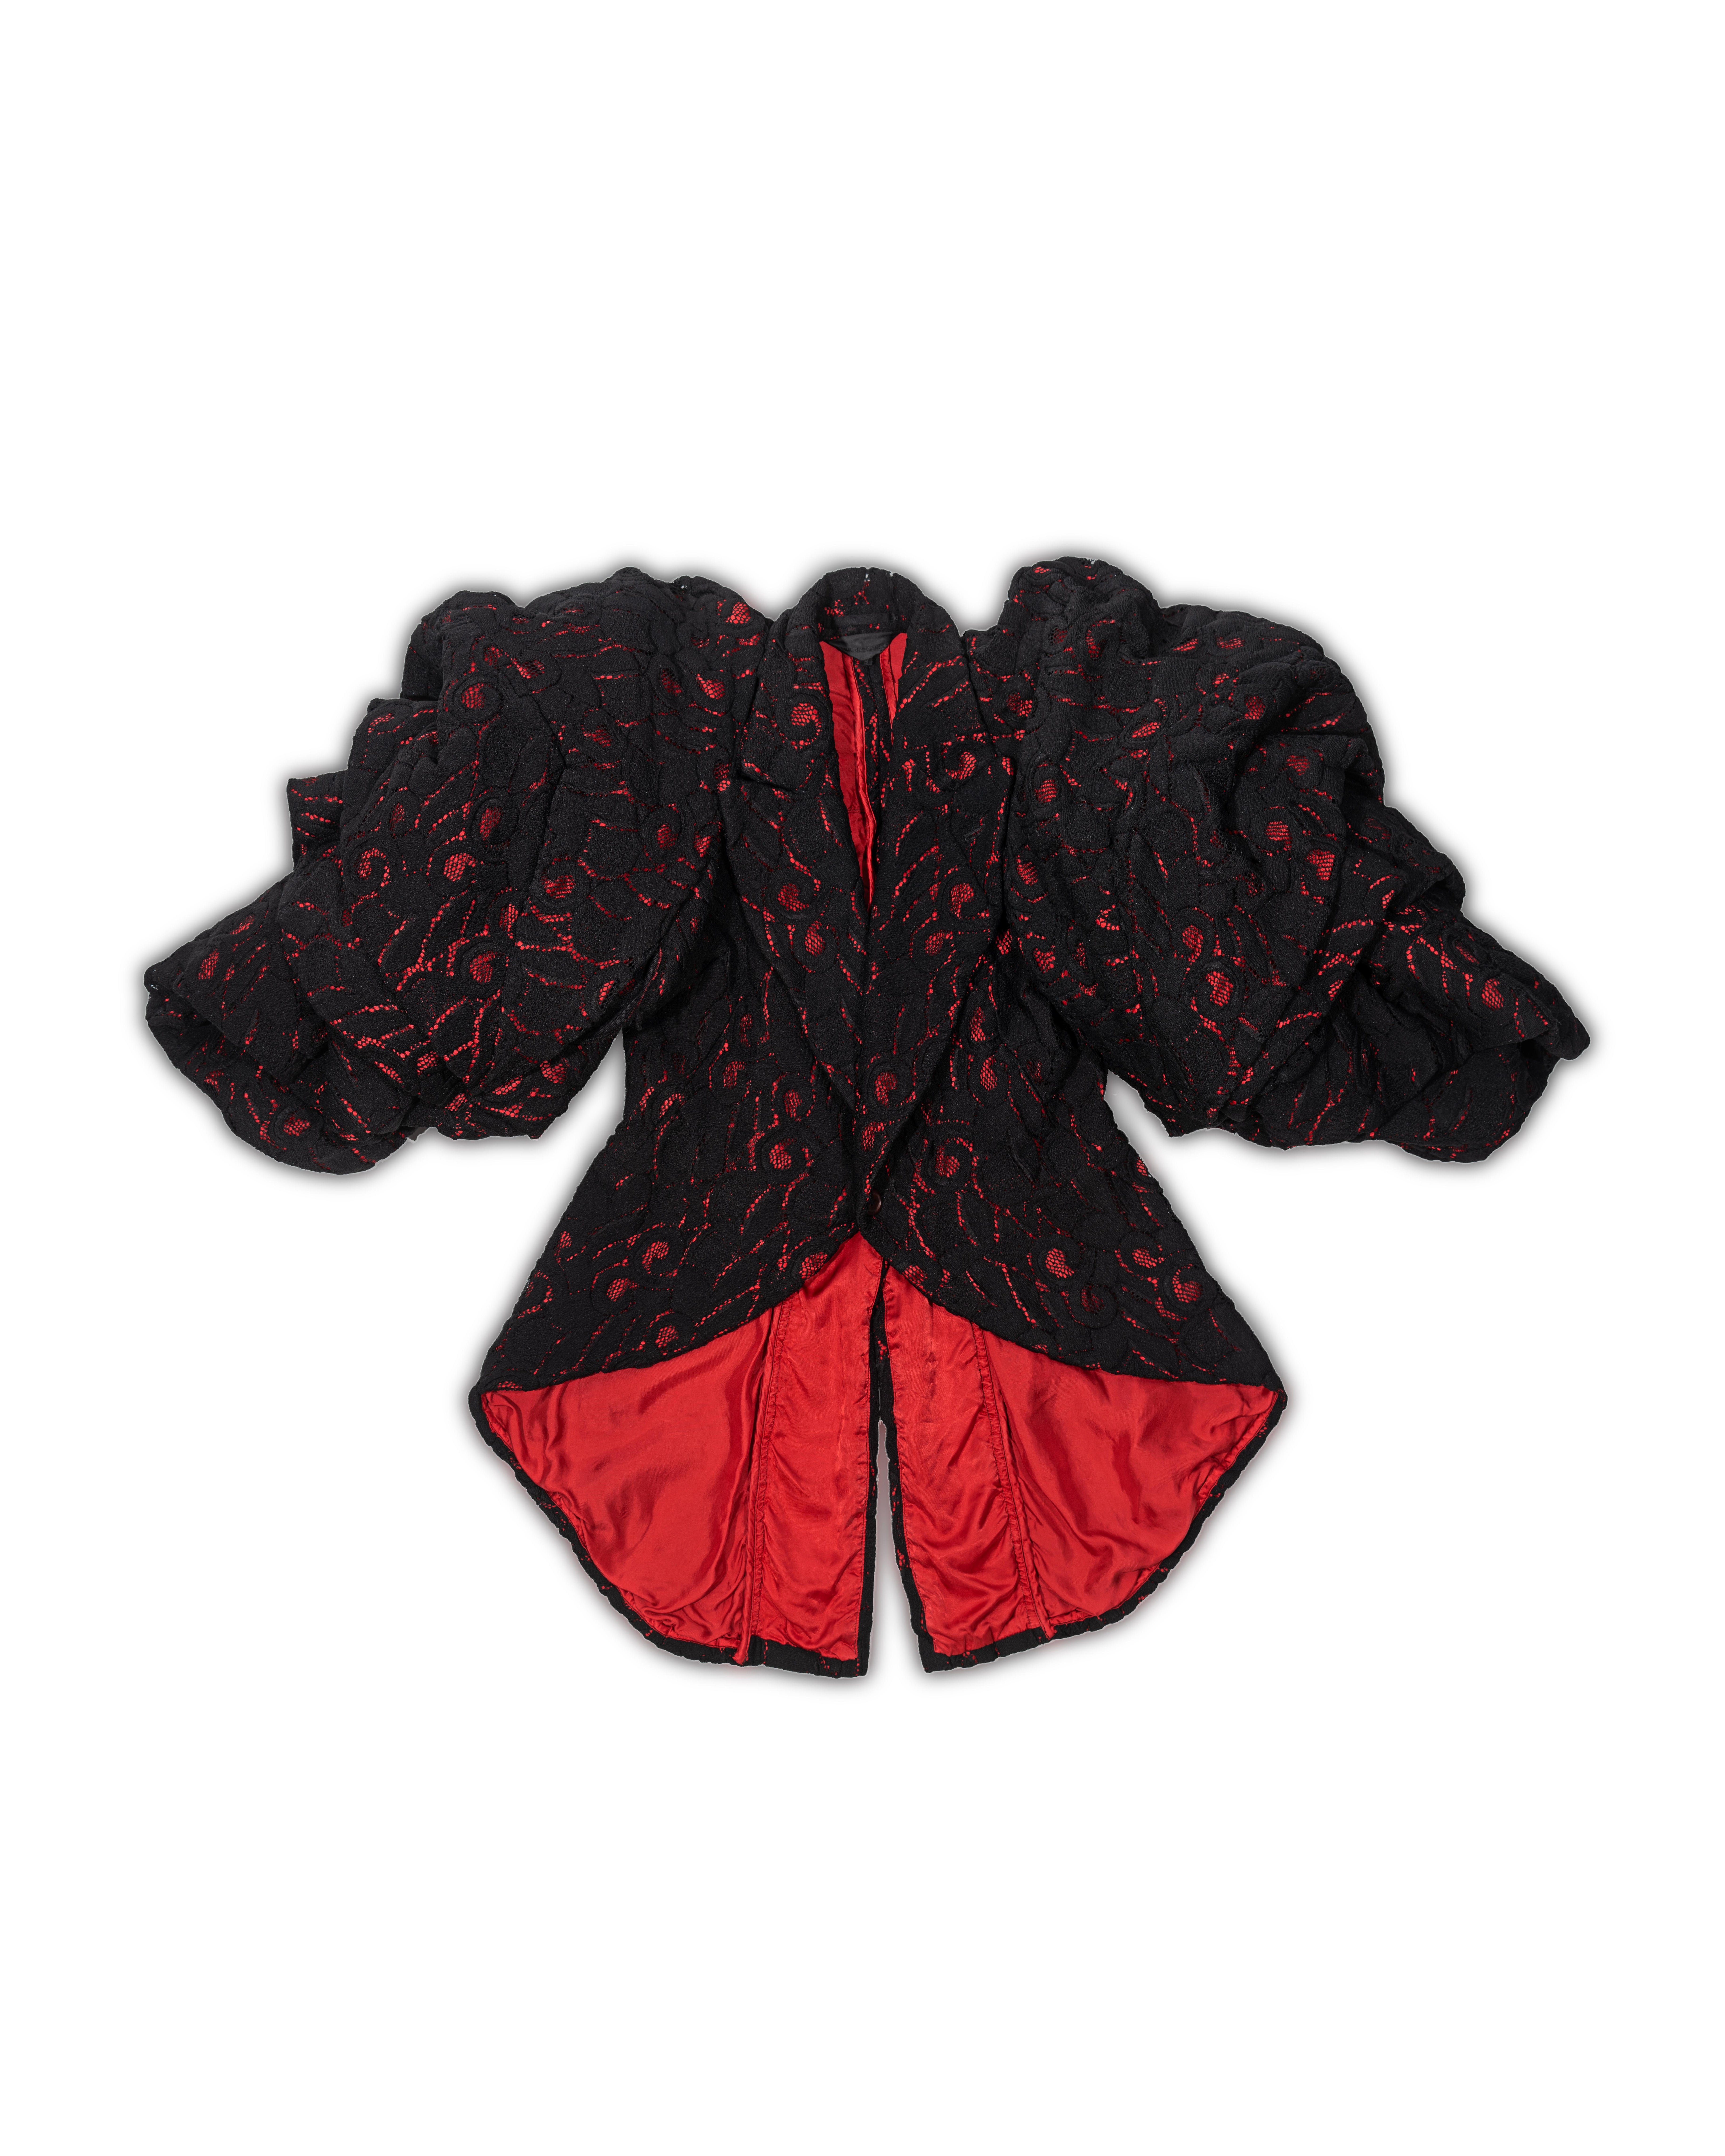 Comme des Garçons Black Lace Heavyweight Jacket with Padded Sleeves, fw 2013 For Sale 8